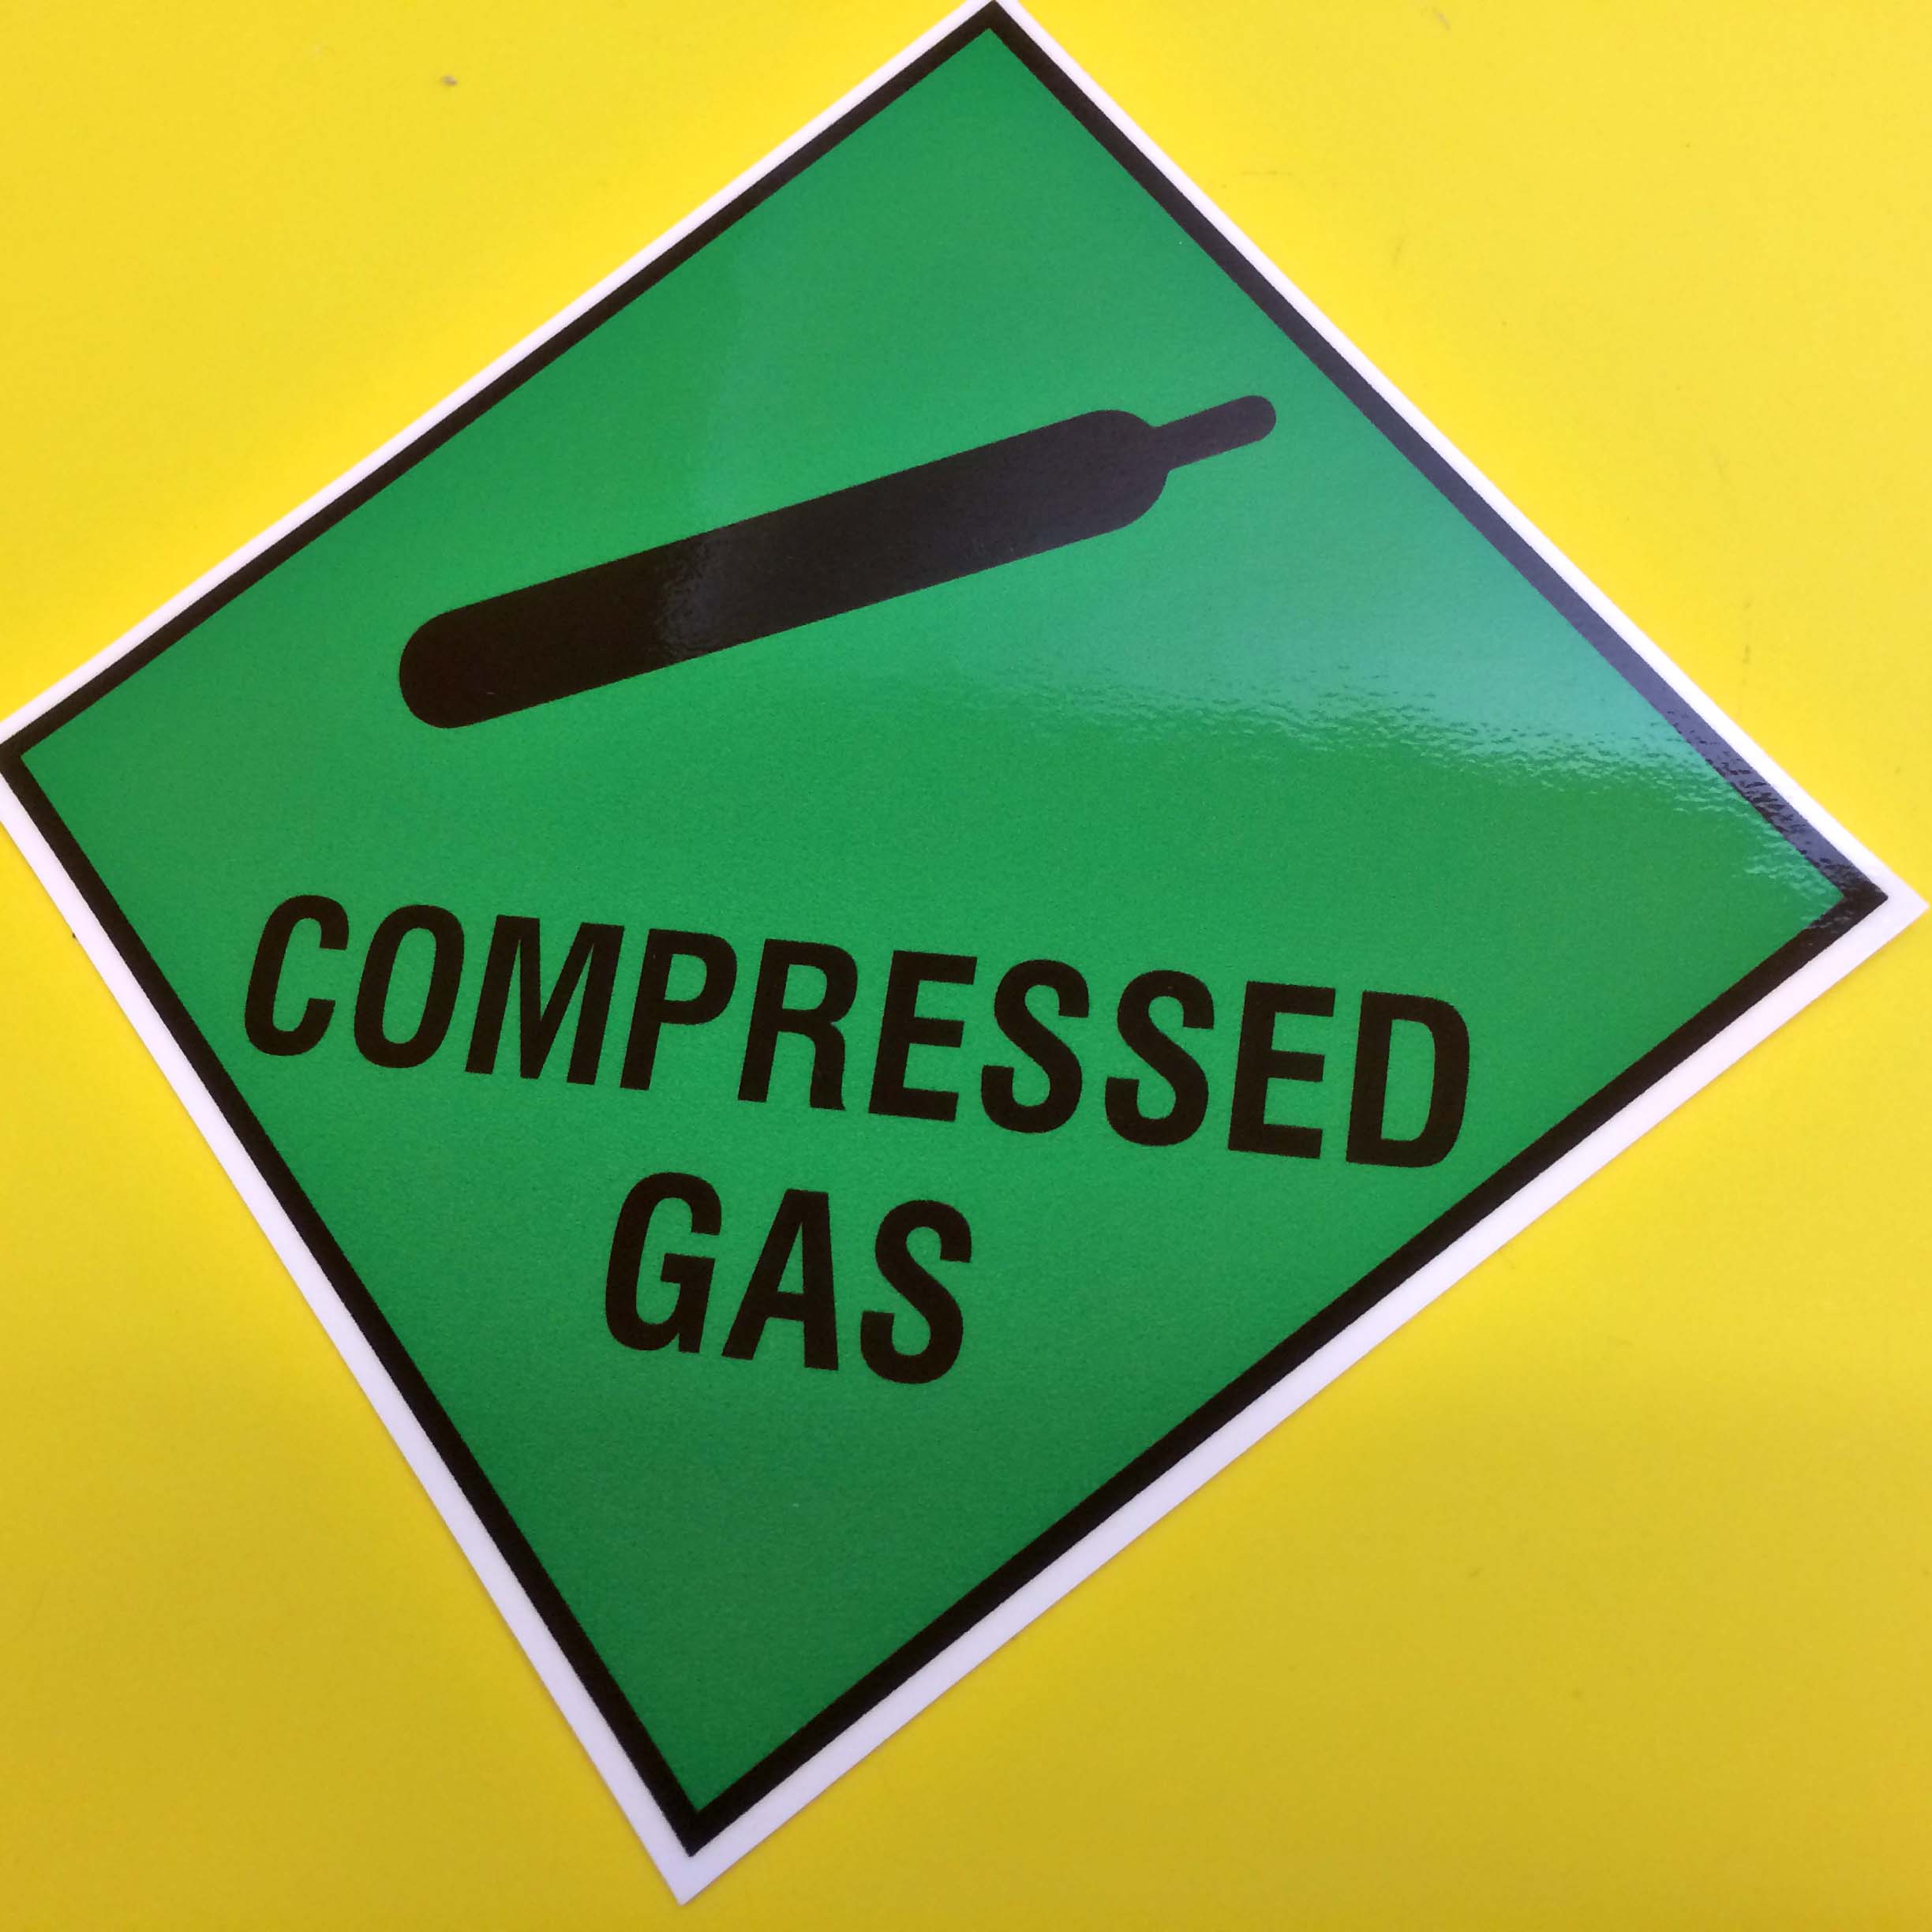 Compressed Gas in black uppercase lettering and a gas cylinder on a green background.